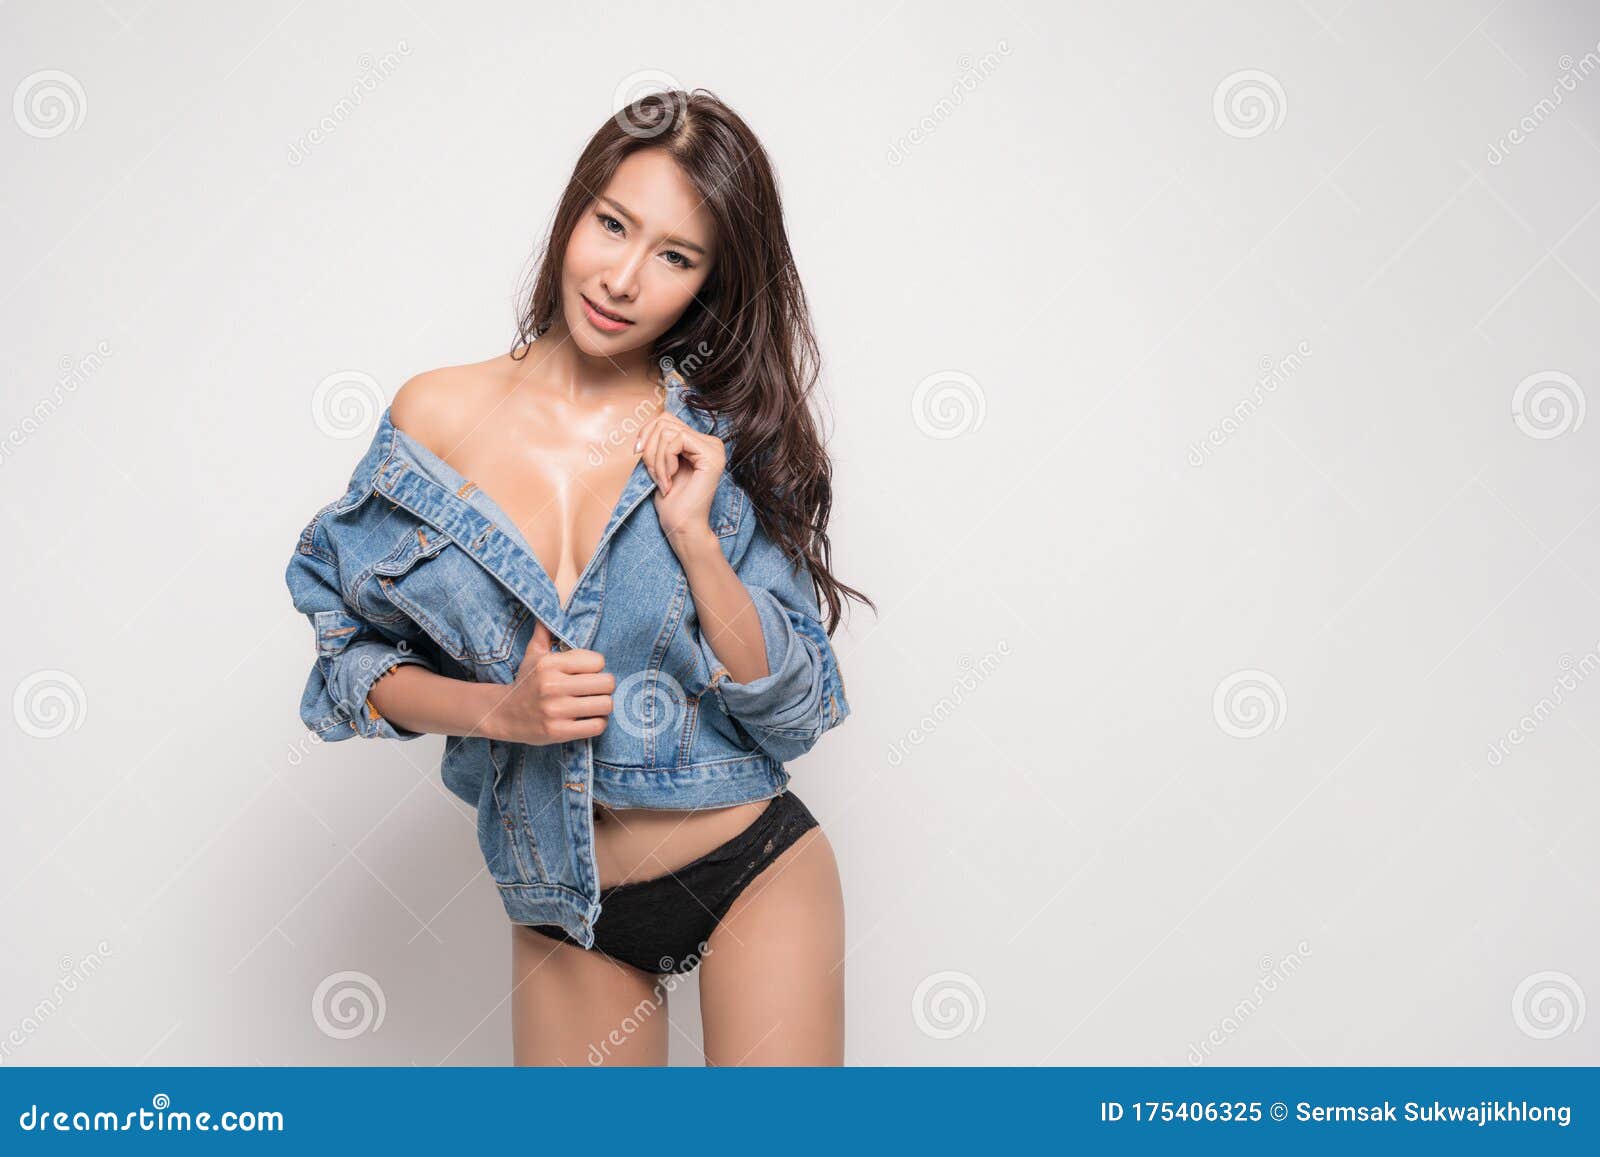 Woman Wearing Blue Jeans Jacket with No Bra Stock Image - Image of female,  happy: 175406325